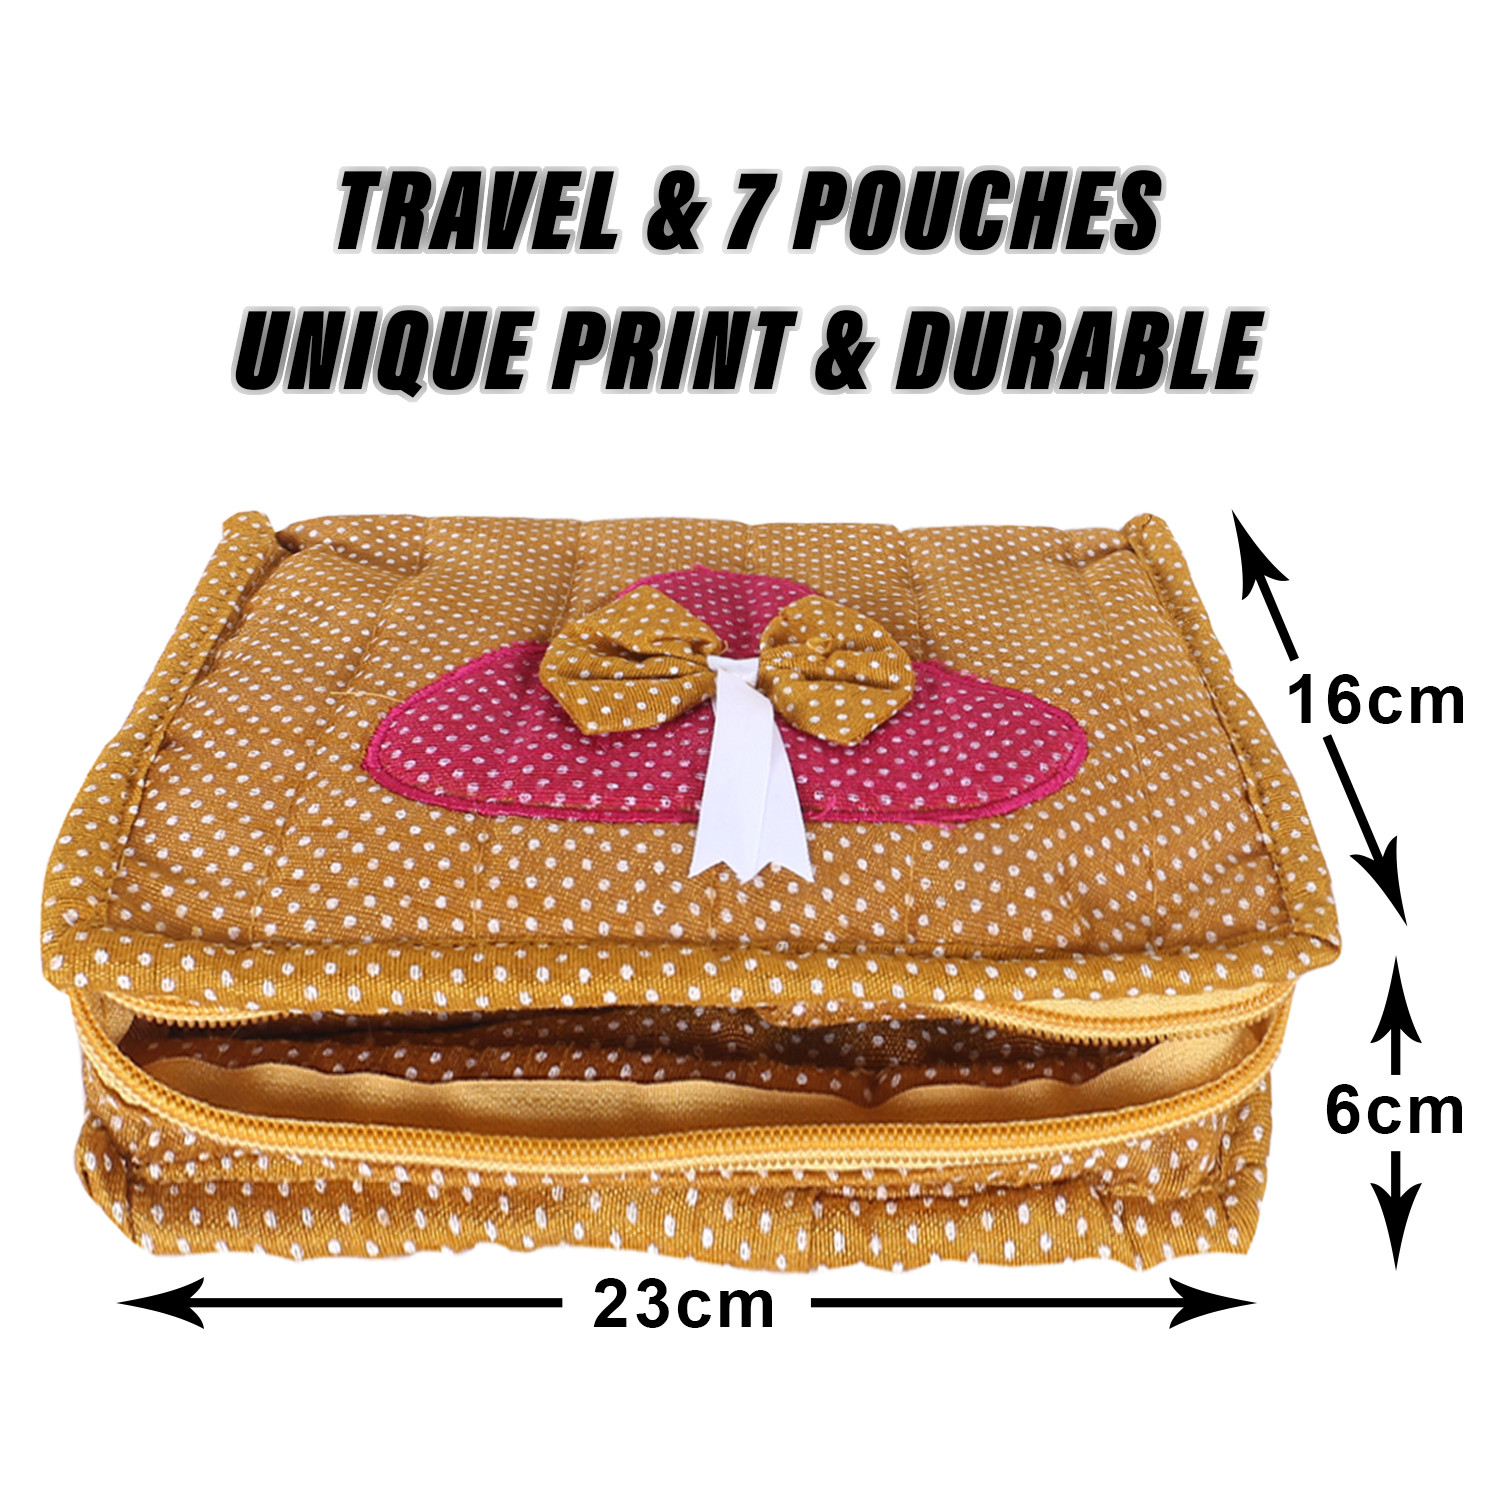 Kuber Industries Jewellery Kit | Cotton Bow Dot Print Travel Kit | 7 Pouch Jewellery Storage Kit | Makeup Organizer for Woman | Gold